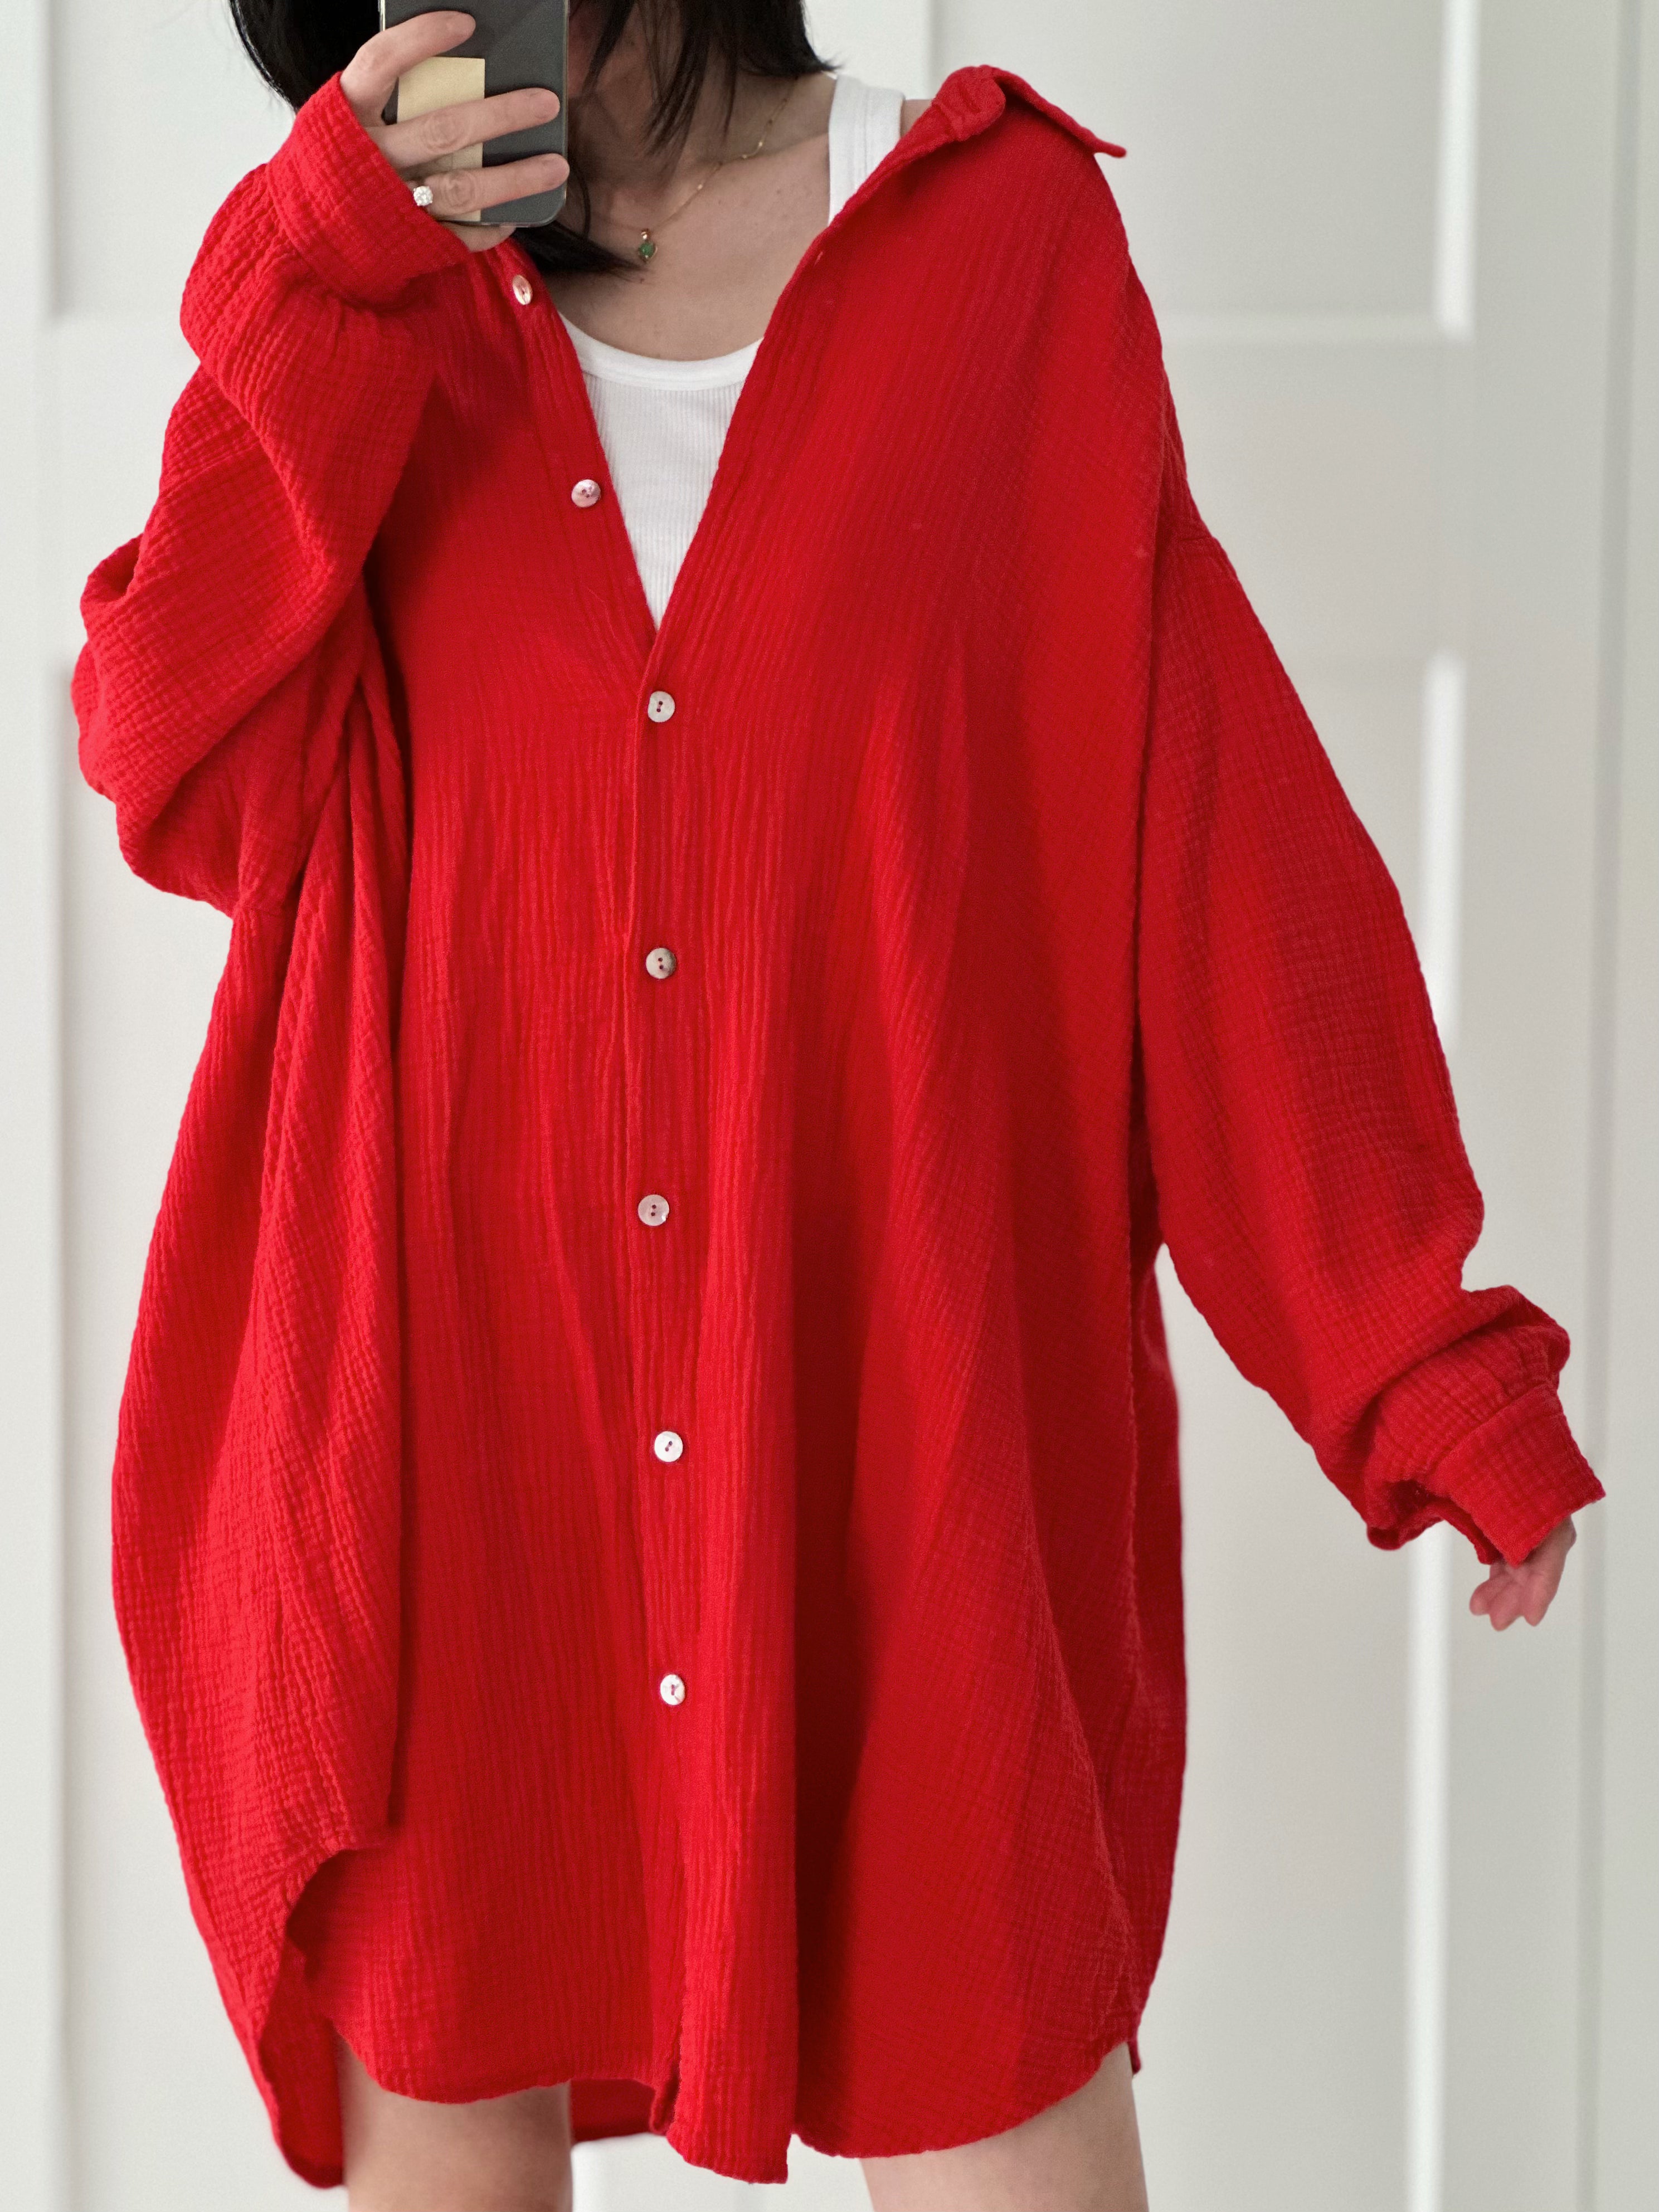 Musselin Bluse, long oversize, Rot